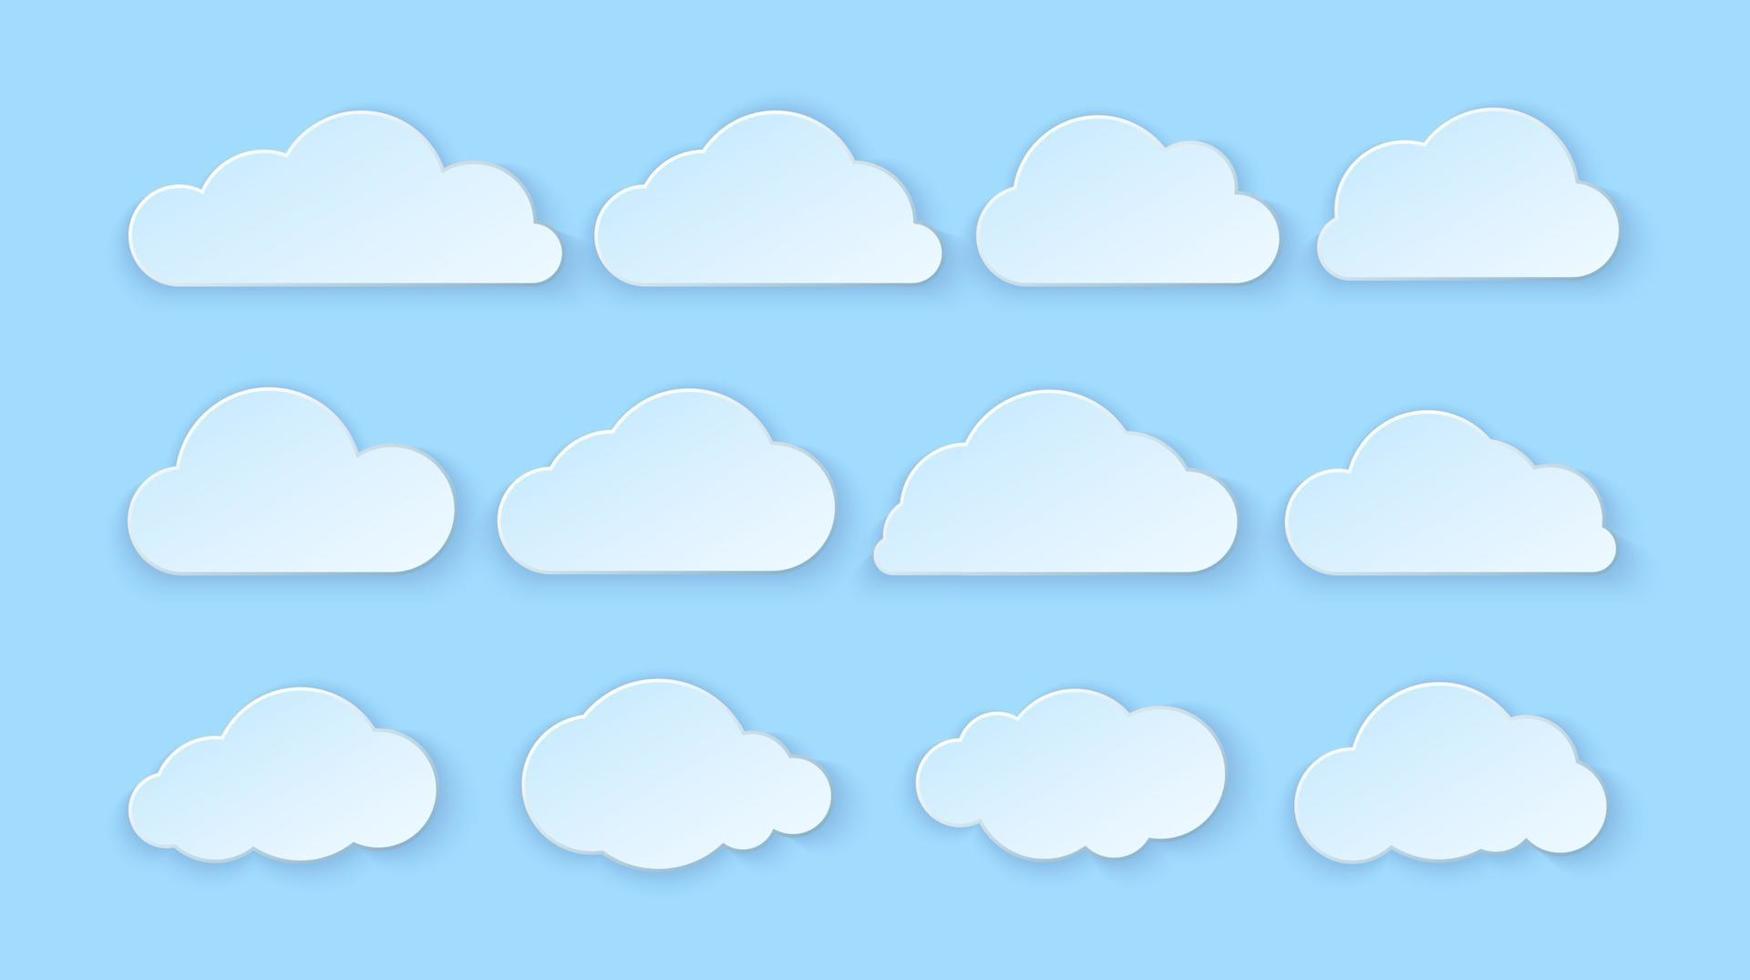 Abstract paper clouds set. Paper clouds on blue background. Vector illustration